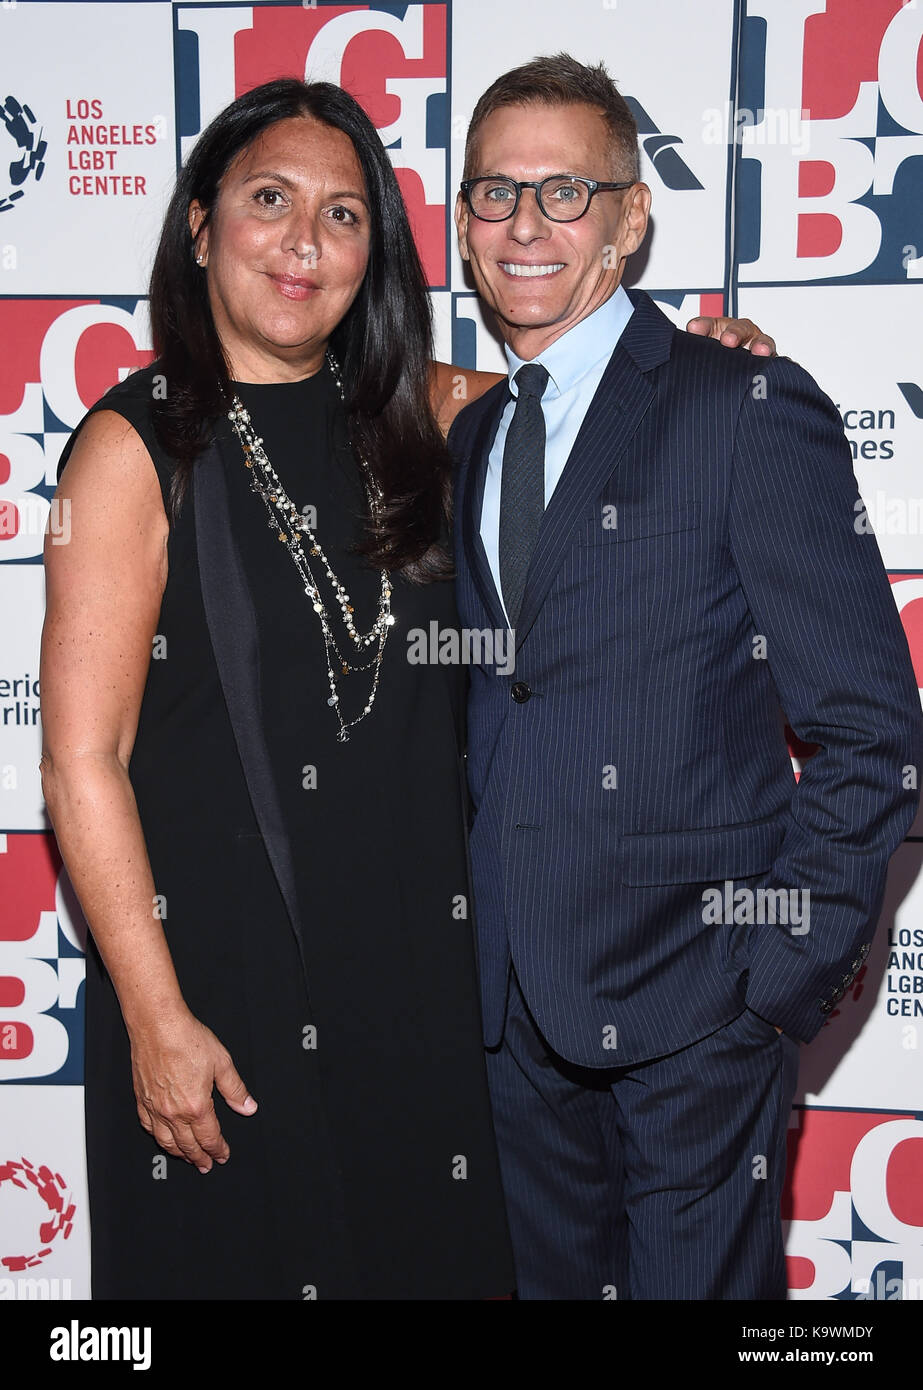 Beverly Hills, California, USA. 23rd Sep, 2017. Kathy Kloves and Michael Lombardo arrives for the LGBT Center's 48th Annual Vanguard Awards at the Beverly Hilton Hotel. Credit: Lisa O'Connor/ZUMA Wire/Alamy Live News Stock Photo